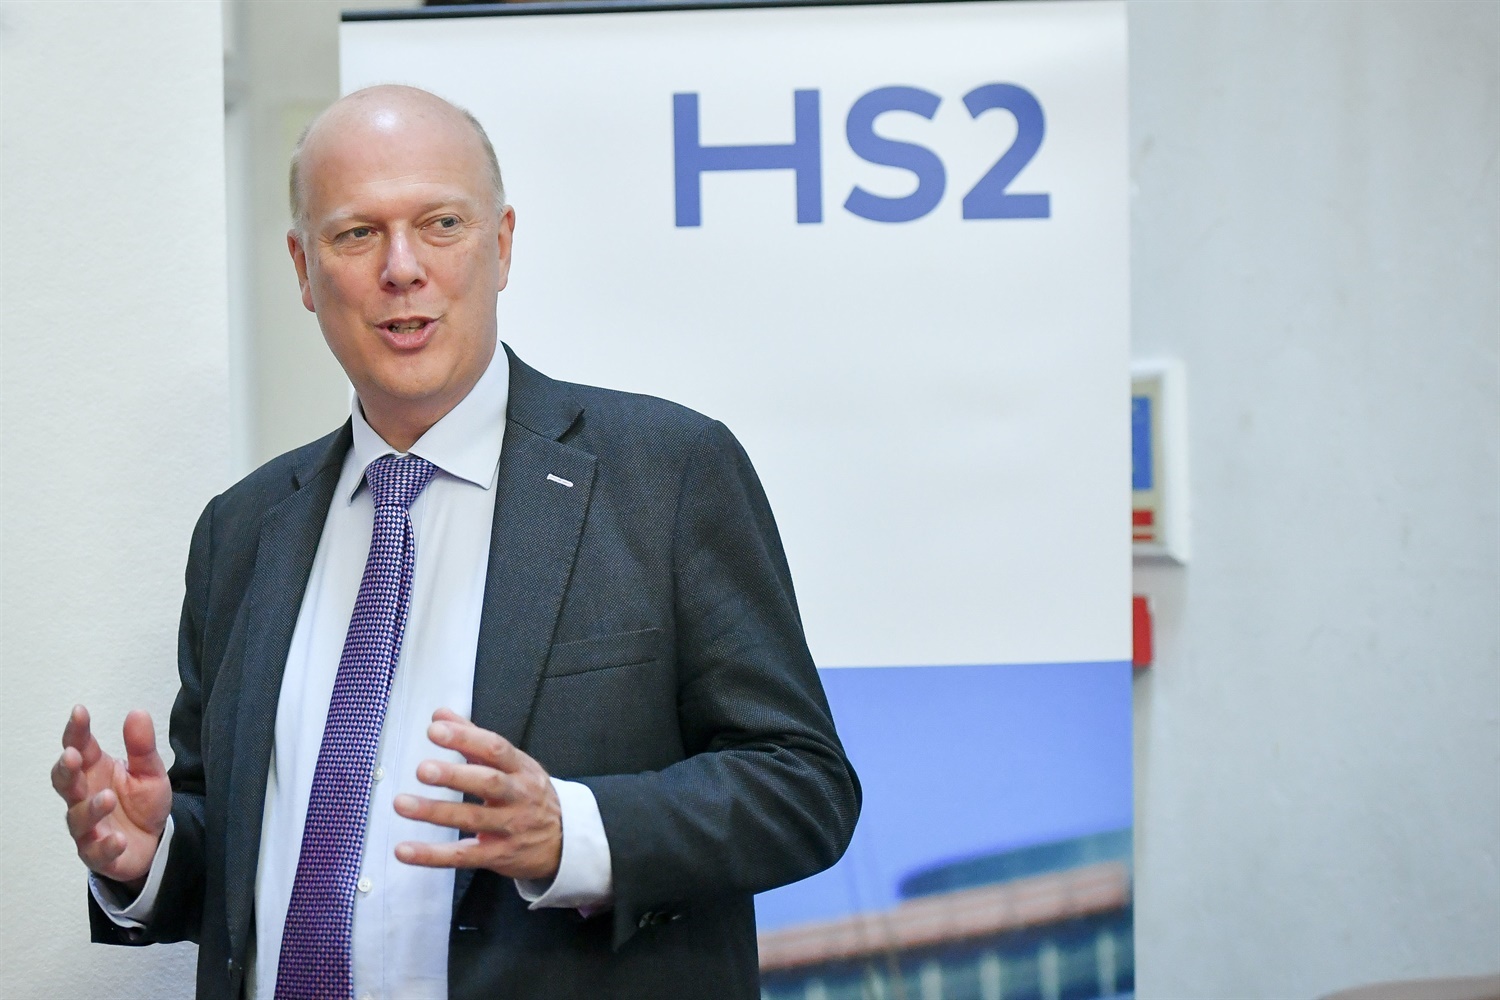 First leg of HS2 ‘passing the point of no return’ due to amount of money already invested, says NAO head